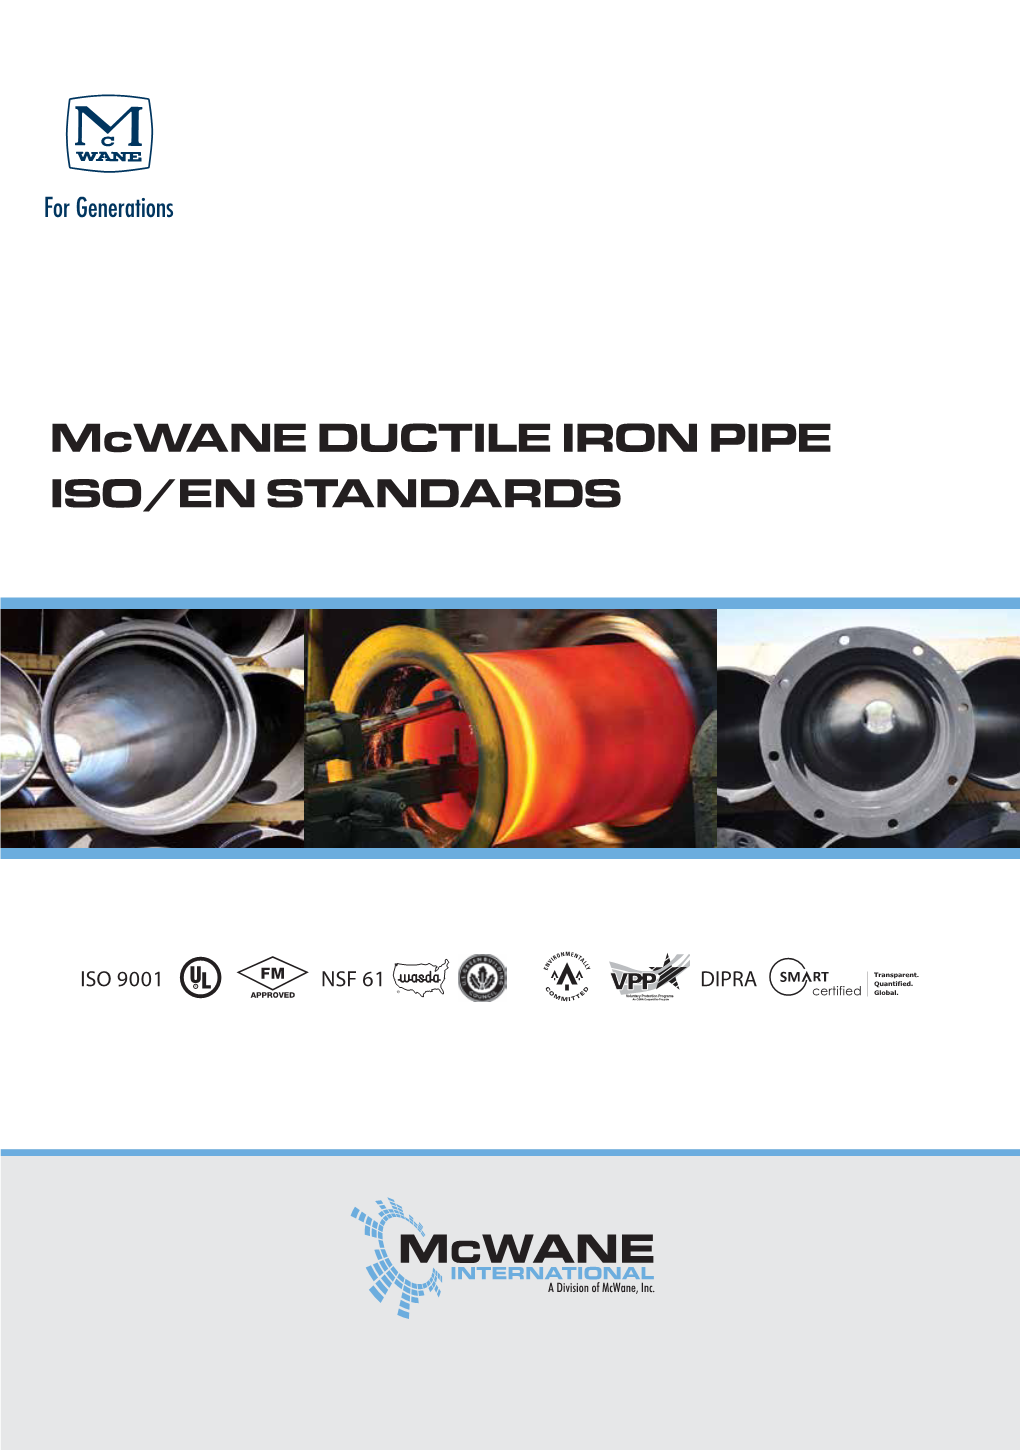 Mcwane Ductile Iron Pipes Are Offered with Various Coatings and Linings As Detailed Below